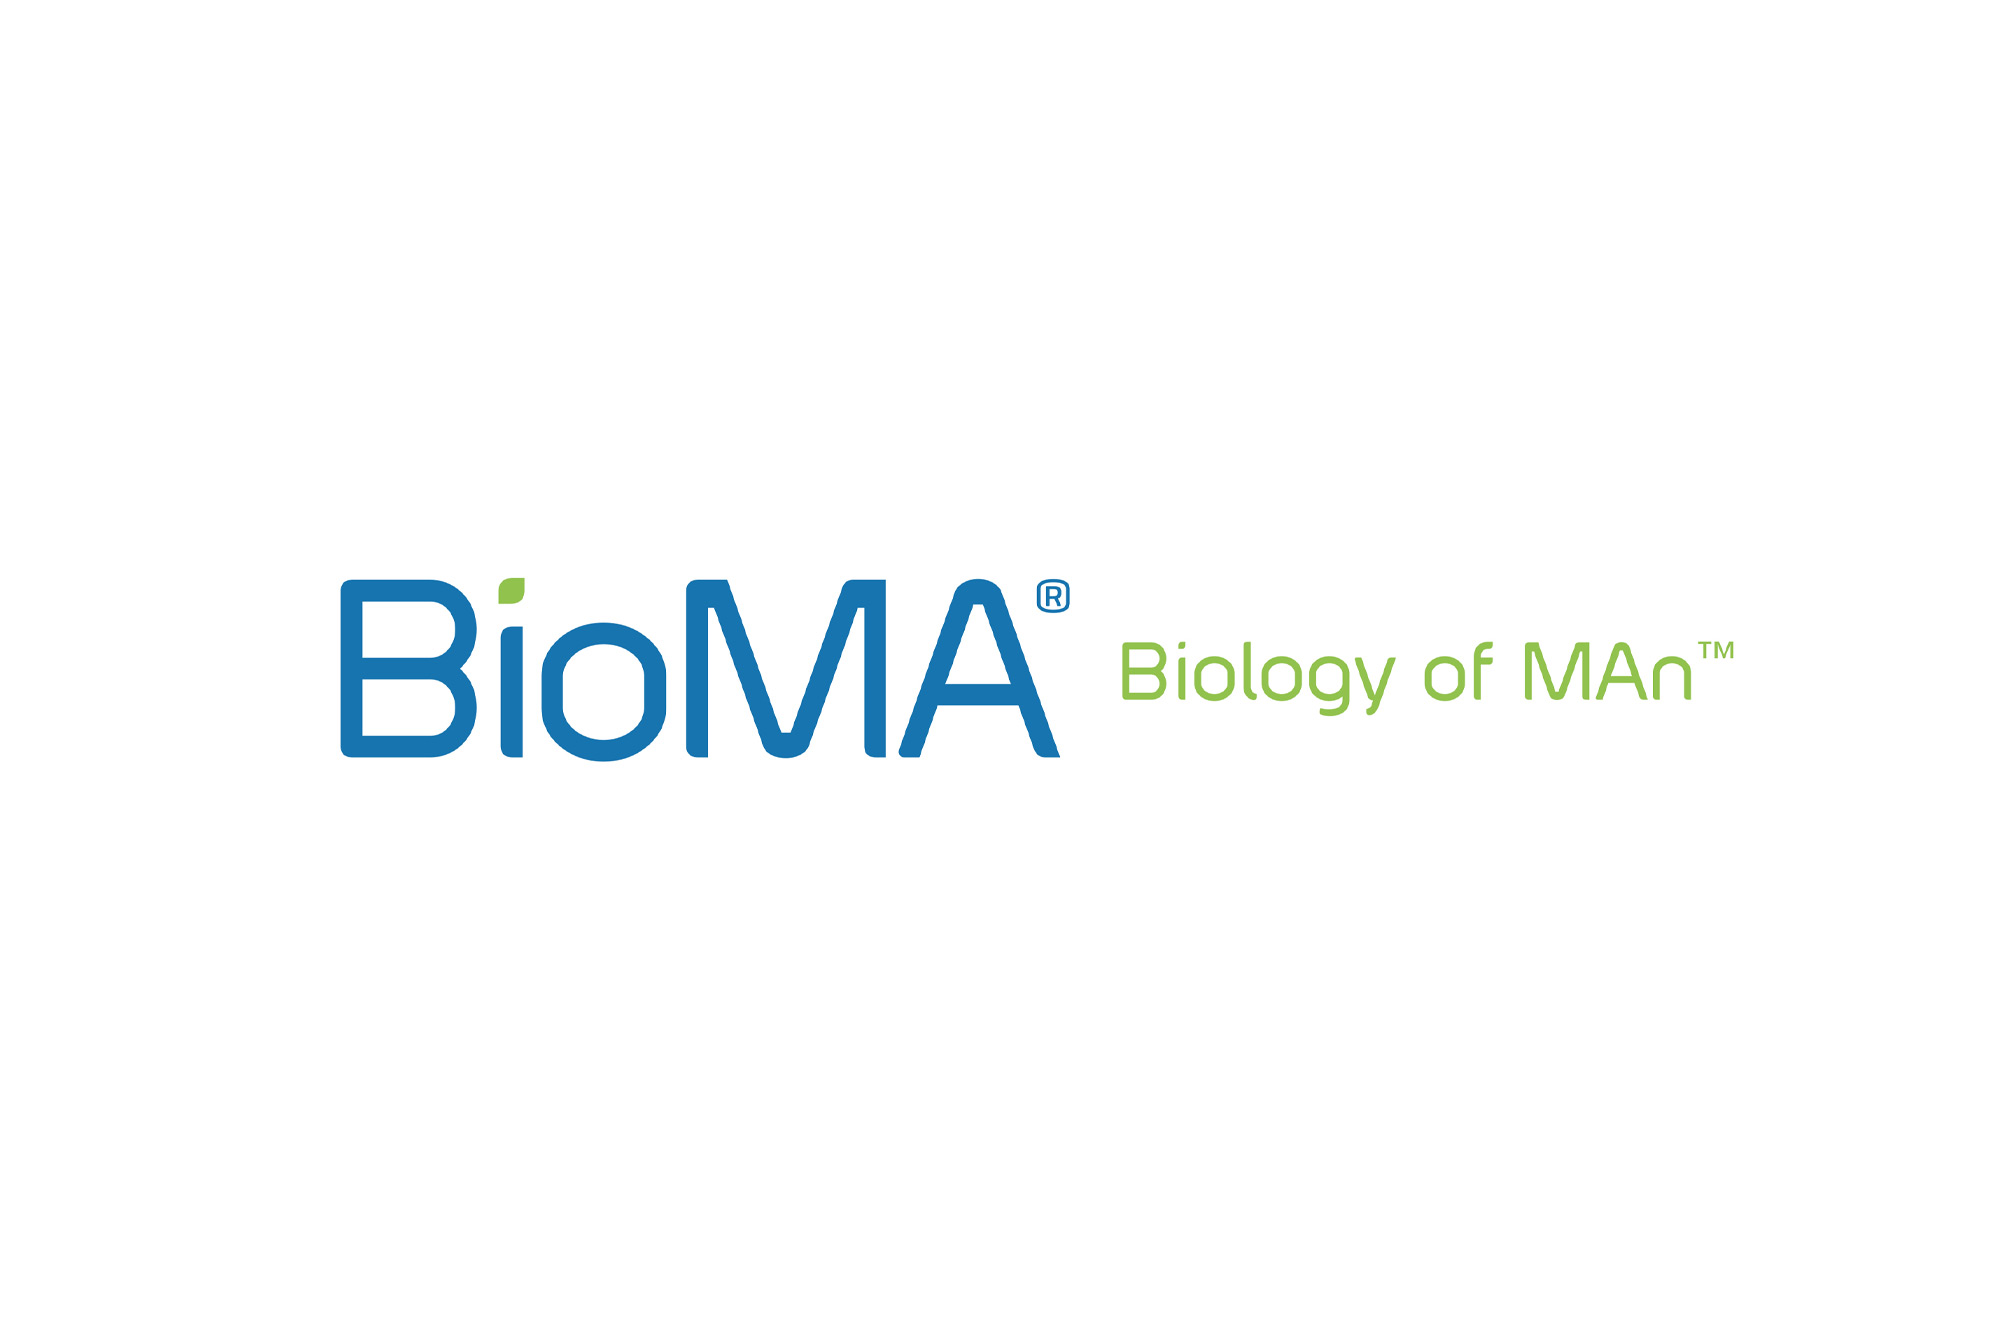 BioMA - Biology of MAn logo design for a brand offering from biomedical company Glyciome.